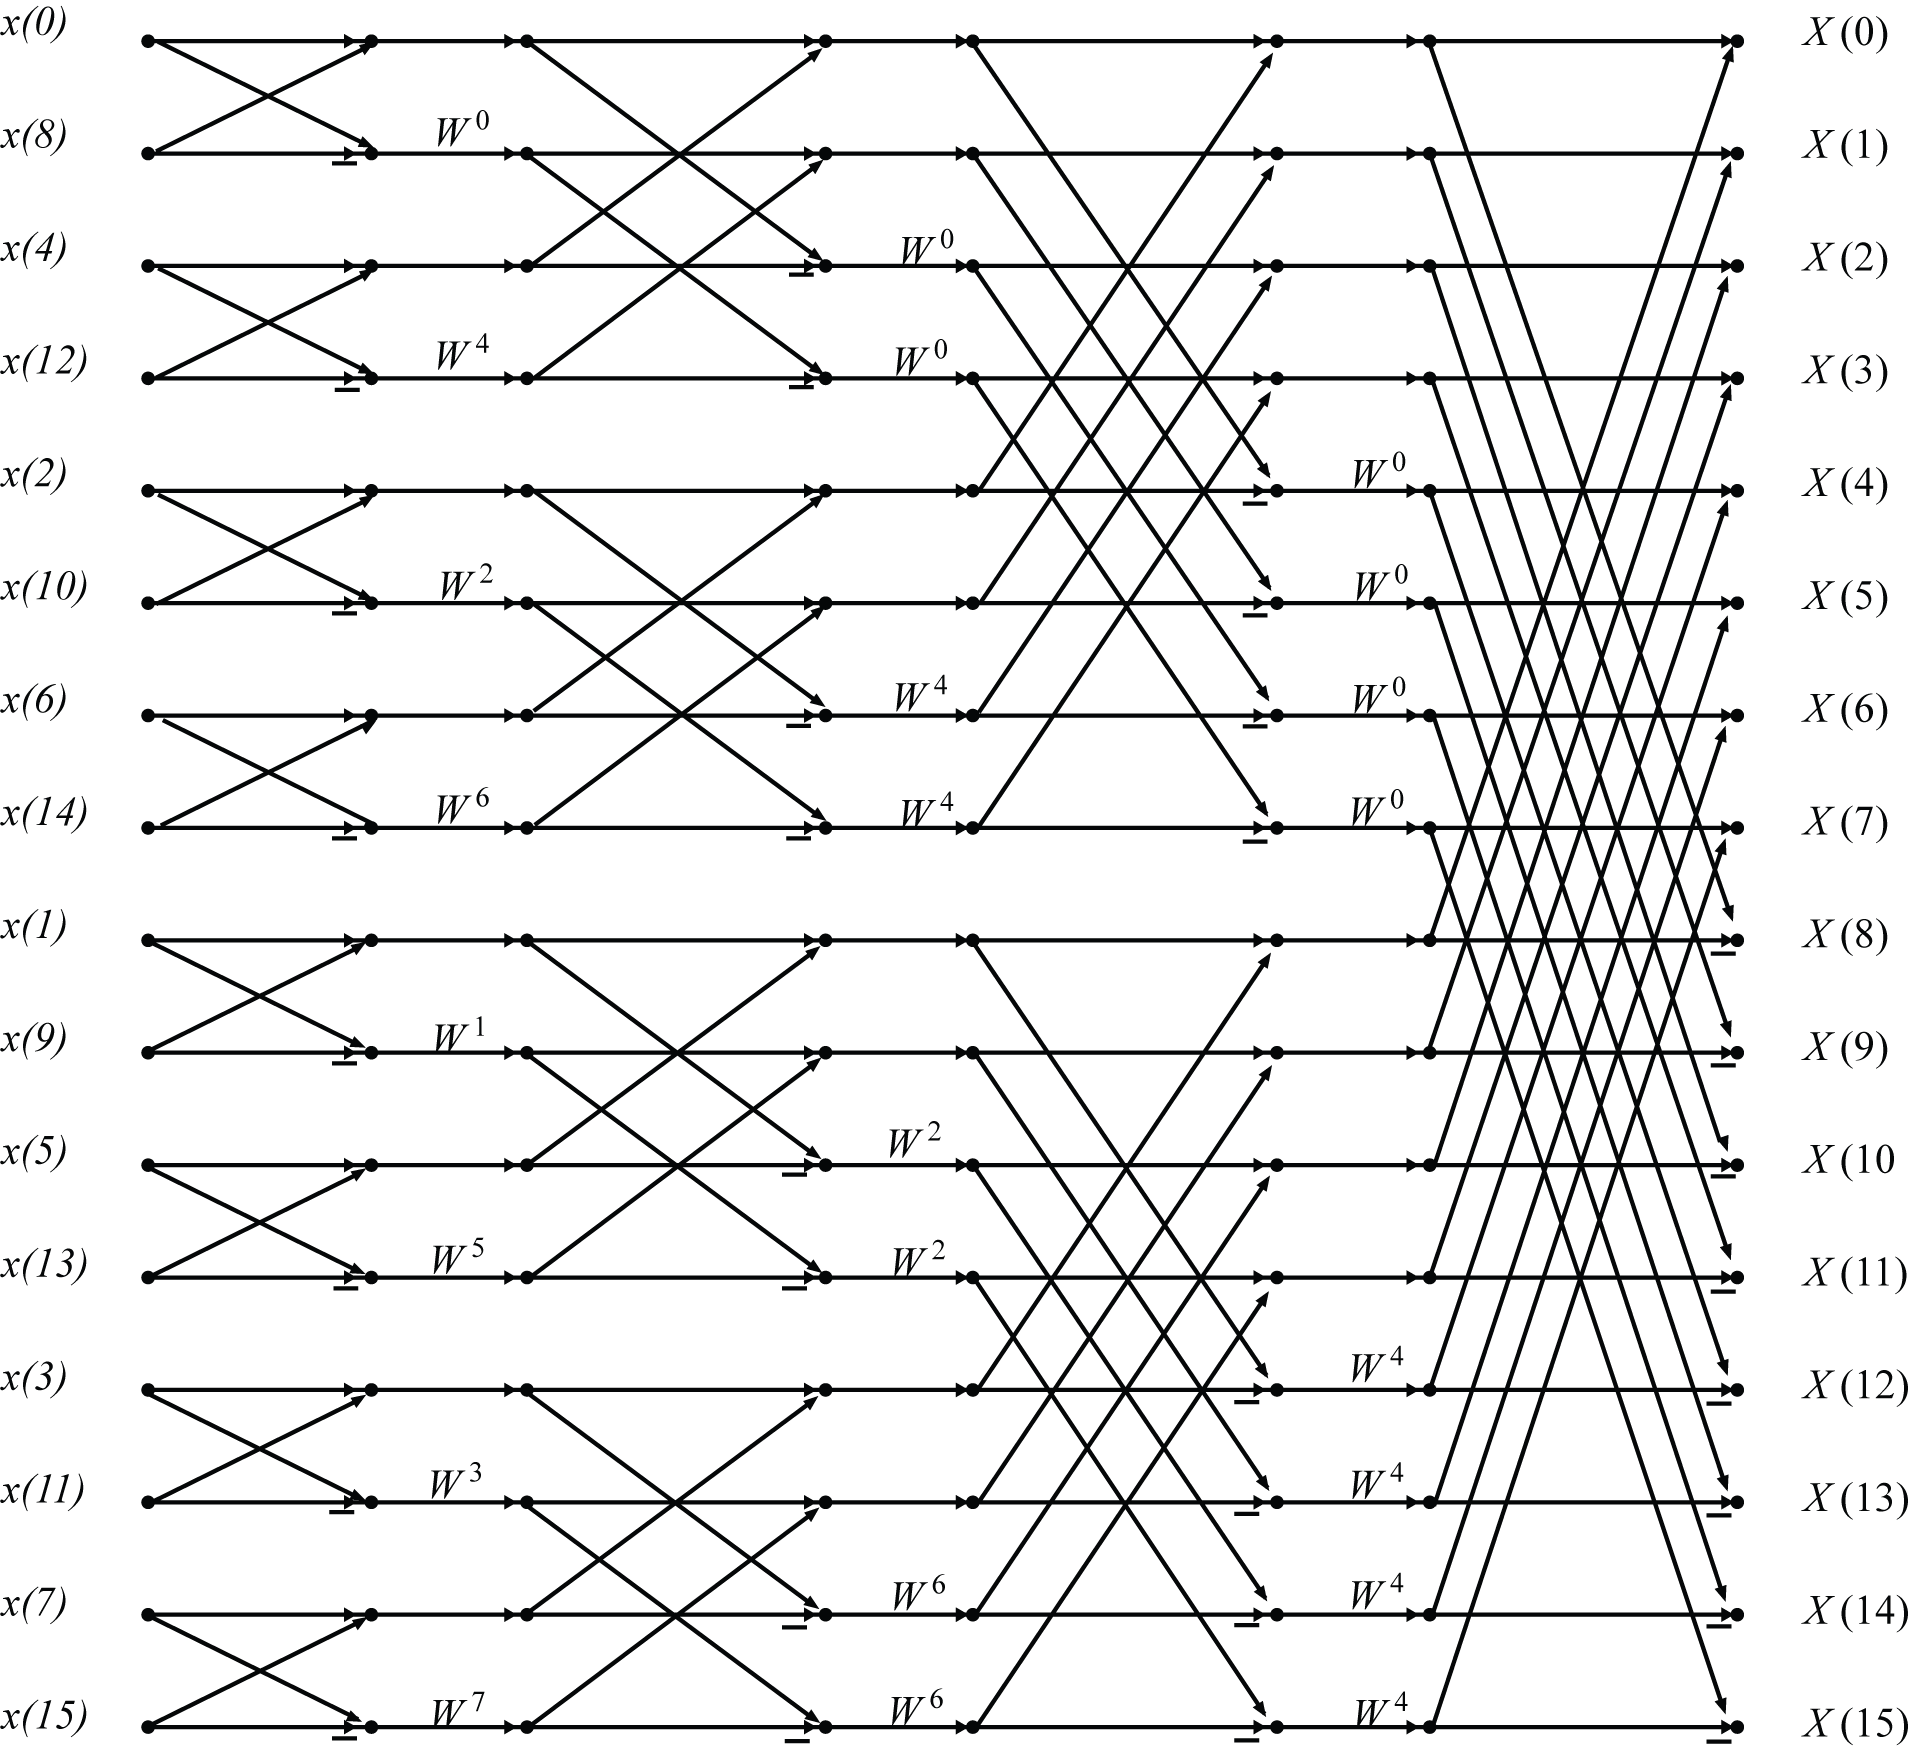 This is a complex figure consisting of sixteen horizontal lines connected by various diagonal lines. The diagonal lines connect to the horizontal lines at eight different points. The lines will be referenced by order from top to bottom, and the points will be referenced by numbered dots from right to left in this description. All of the connected diagonal segments referenced as a group move in the same direction systematically, do not cross paths, and connect only one dot to another. The first dot on lines one through eight are connected to the second dot on lines nine through sixteen, with each line crossing and moving down eight spaces. Conversely, the first dot on lines nine through sixteen connect to the second dot on lines one through eighteen. In the upper half of the next section, the third dots on lines one through four connect to the fourth dots on lines five through eight. Conversely, the third dots on lines five through eight connect to the fourth dots on lines one through four. In the lower half of the next section, the third dots on lines nine through twelve connect to the fourth dots on lines thirteen through sixteen. The third dots on lines thirteen through sixteen also connect with the fourth dots on lines nine through twelve. The next section is visually divided into four parts. In part one, the fifth dots on lines one and two connect to the sixth dots on lines three and four, and the fifth dots on lines three and four connect to the sixth dots on lines one and two. In part two, the fifth dots on lines five and six connect to the sixth dots on lines seven and eight, and the fifth dots on lines seven and eight connect to the sixth dots on lines five and six. In part three, the fifth dots on lines nine and ten connect to the sixth dots on lines eleven and twelve, and the fifth dots on lines eleven and twelve connect to the sixth dots on lines nine and ten. In part four, the fifth dots on lines thirteen and fourteen connect to the sixth dots on lines fifteen and sixteen, and the fifth dots on lines fifteen and sixteen connect to the sixth dots on lines thirteen and fourteen. In the final section of the figure, the diagonal lines are grouped into eight sections that all follow a similar pattern. The seventh dots on even numbered lines connect to the eighth dots on the odd numbered line above them, and the seventh dots on odd numbered lines connect to the eighth dots on the even numbered lines below them. There are various sections of the figure that are labeled with a variable. First, to the right of each horizontal lines and dot number one, the lines are labeled in order from x(0) to x(15) from top to bottom. In between dots two and three on lines five through eight is the label W^0, and in between dots two and three on lines thirteen through sixteen is the label W^4. In between dots four and five on lines three and four is the label W^0. In between dots four and five on lines seven and eight is the label W^4. In between dots four and five on lines eleven and twelve is the label W^2. In between dots four and five on lines fifteen and sixteen is the label W^6. In between dots six and seven on even numbered lines are labeled from top to bottom W^0, W^4, W^2, W^6, W^1, W^5, W^3, W^7. To the left of the horizontal lines and the eighth dots are labels read from top to bottom, X(0), X(8), X(4), X(12), X(2), X(10), X(6), X(14), X(1), X(9), X(5), X(13), X(3), X(11), X(7), and X(15).